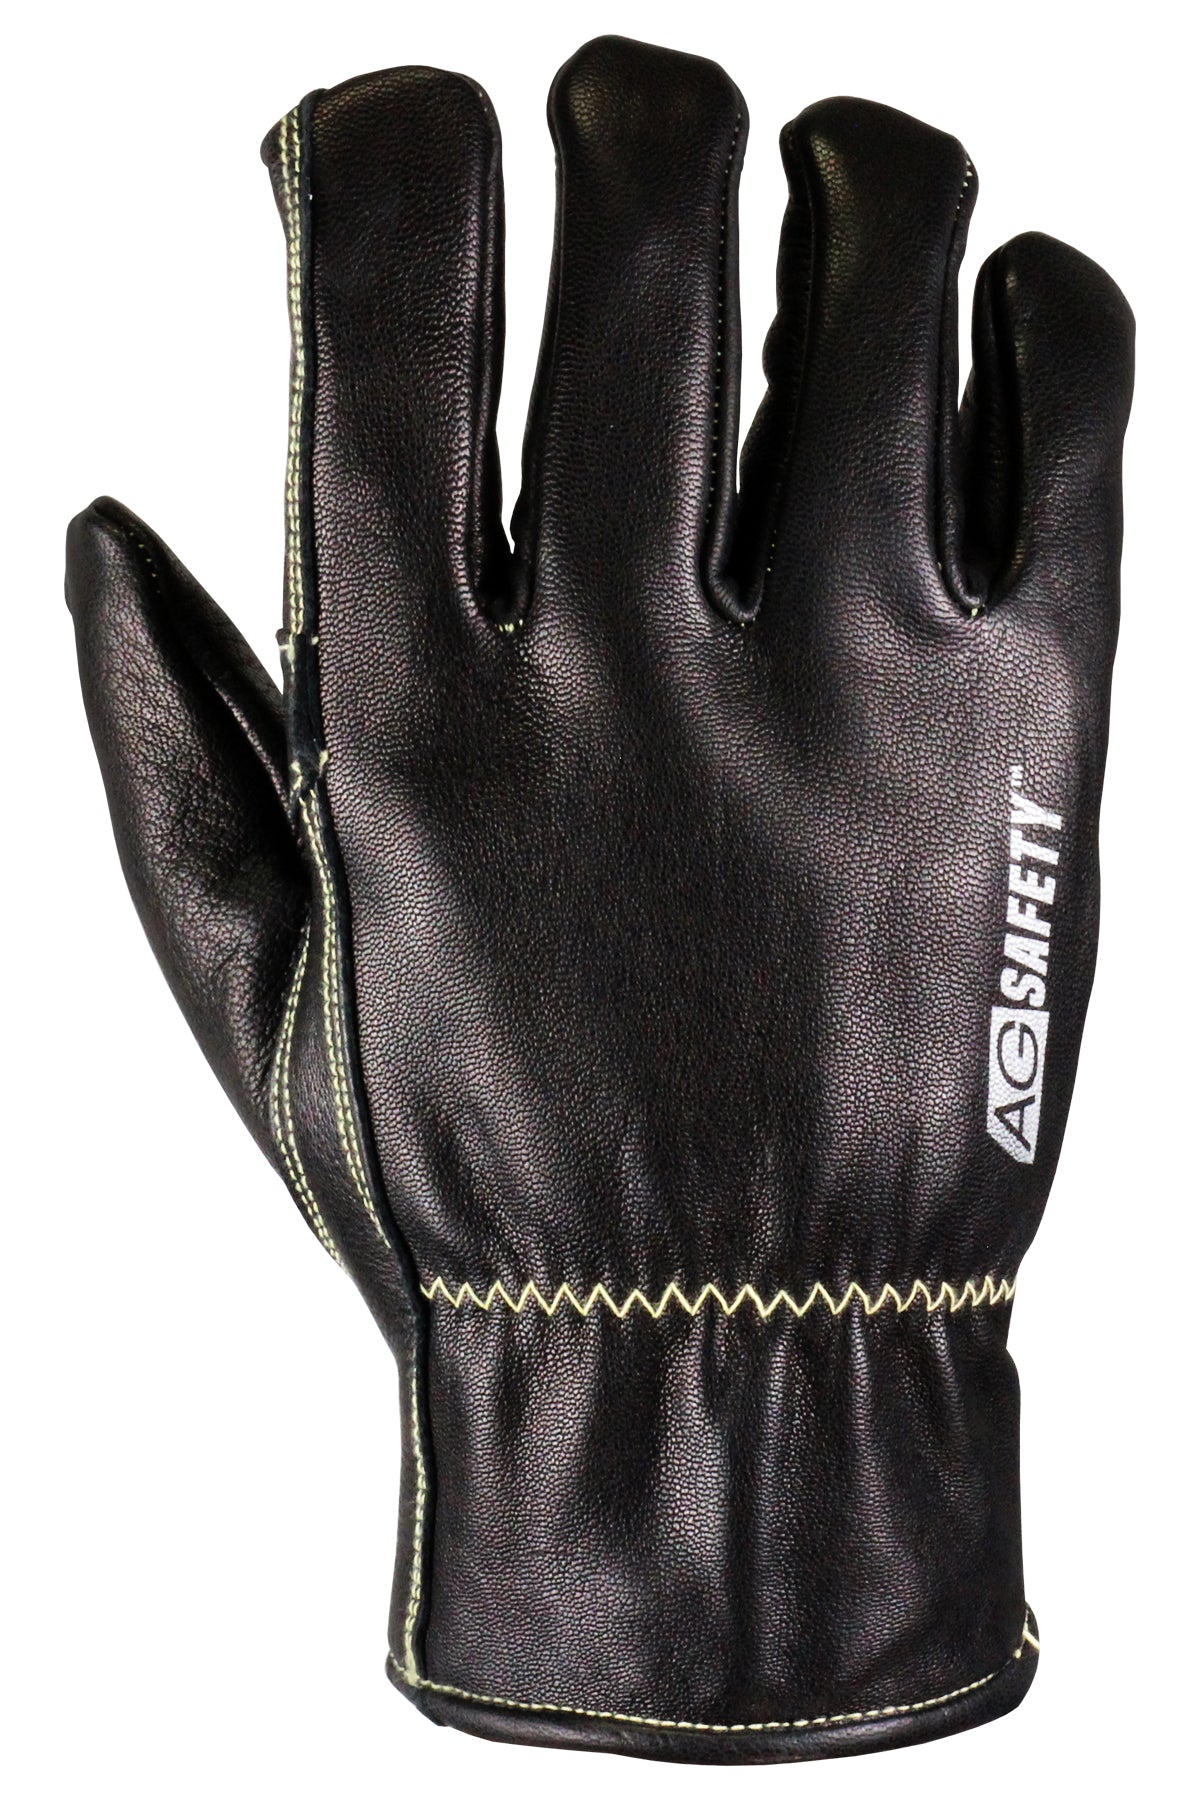 Enespro Arc Rated Drivers Glove, Cut Level A4